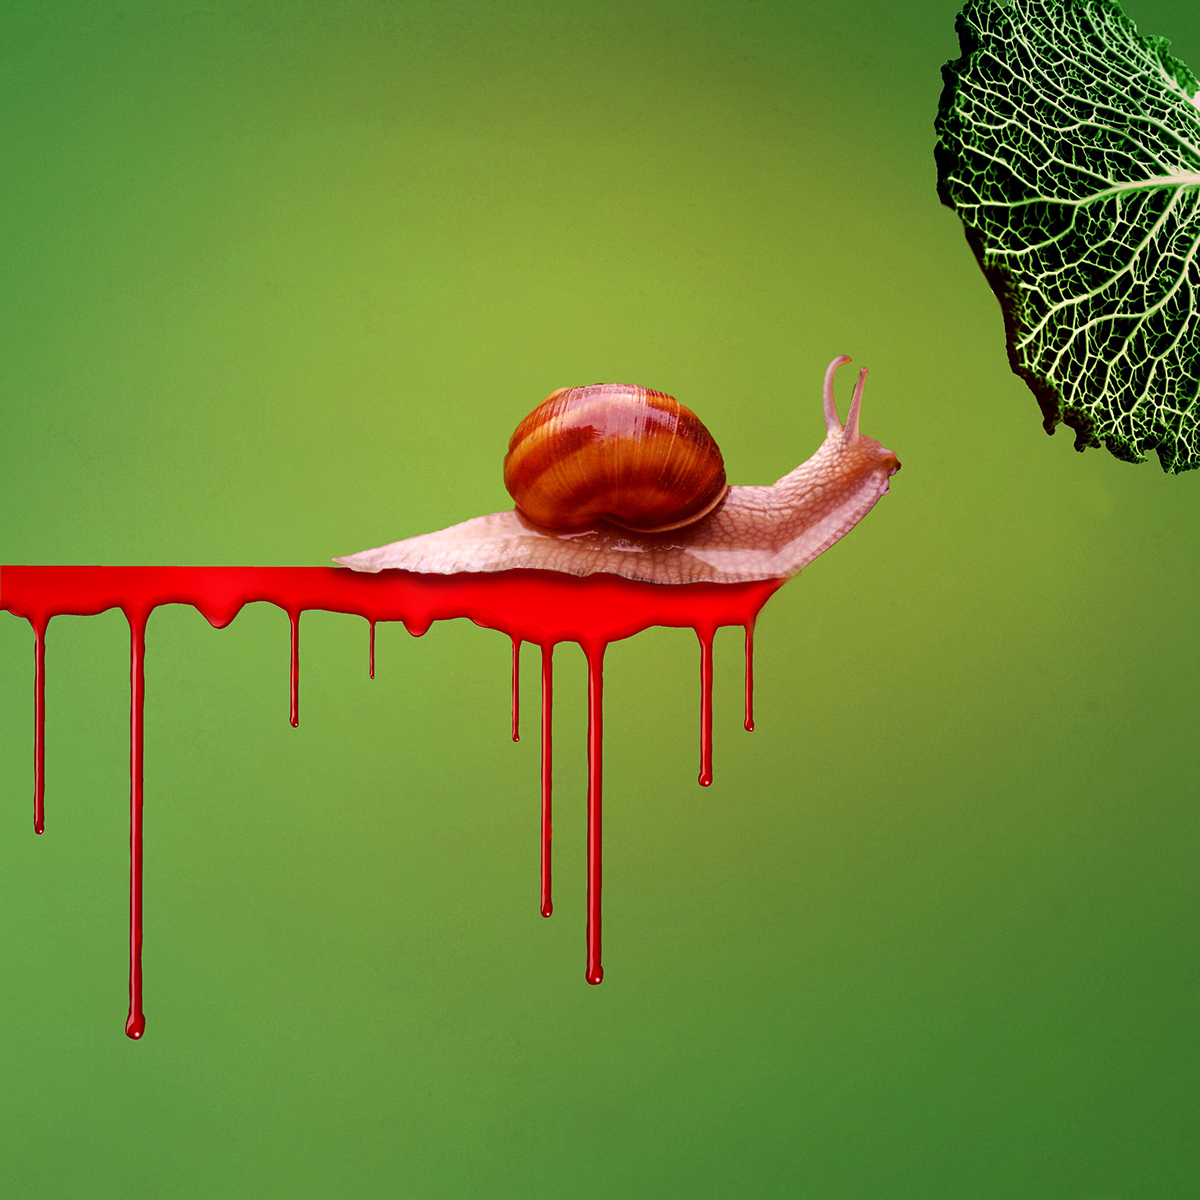 wacom snail color green photoshop texture leaf meaning surreal vibrant